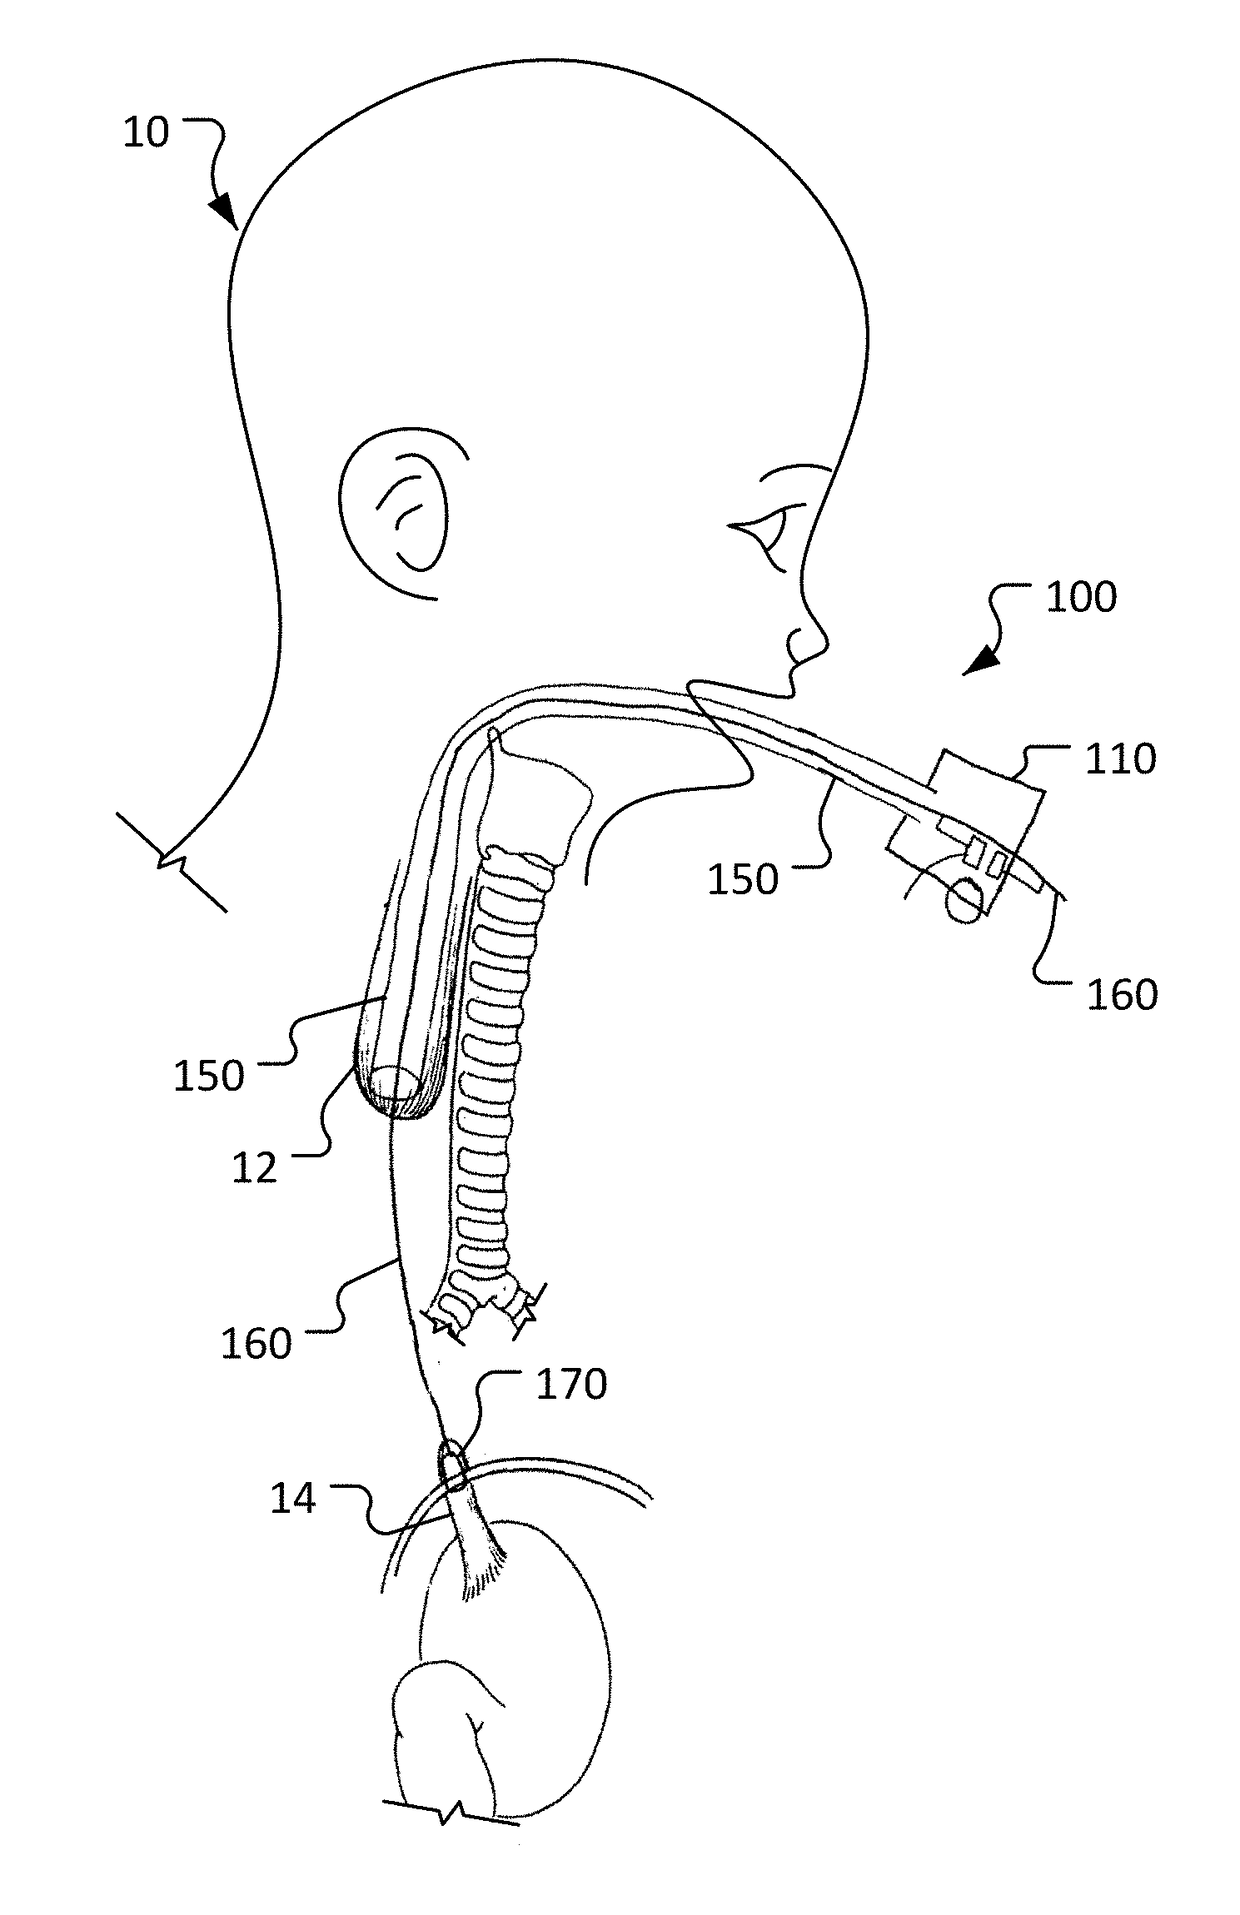 Devices and methods for esophageal lengthening and anastomosis formation